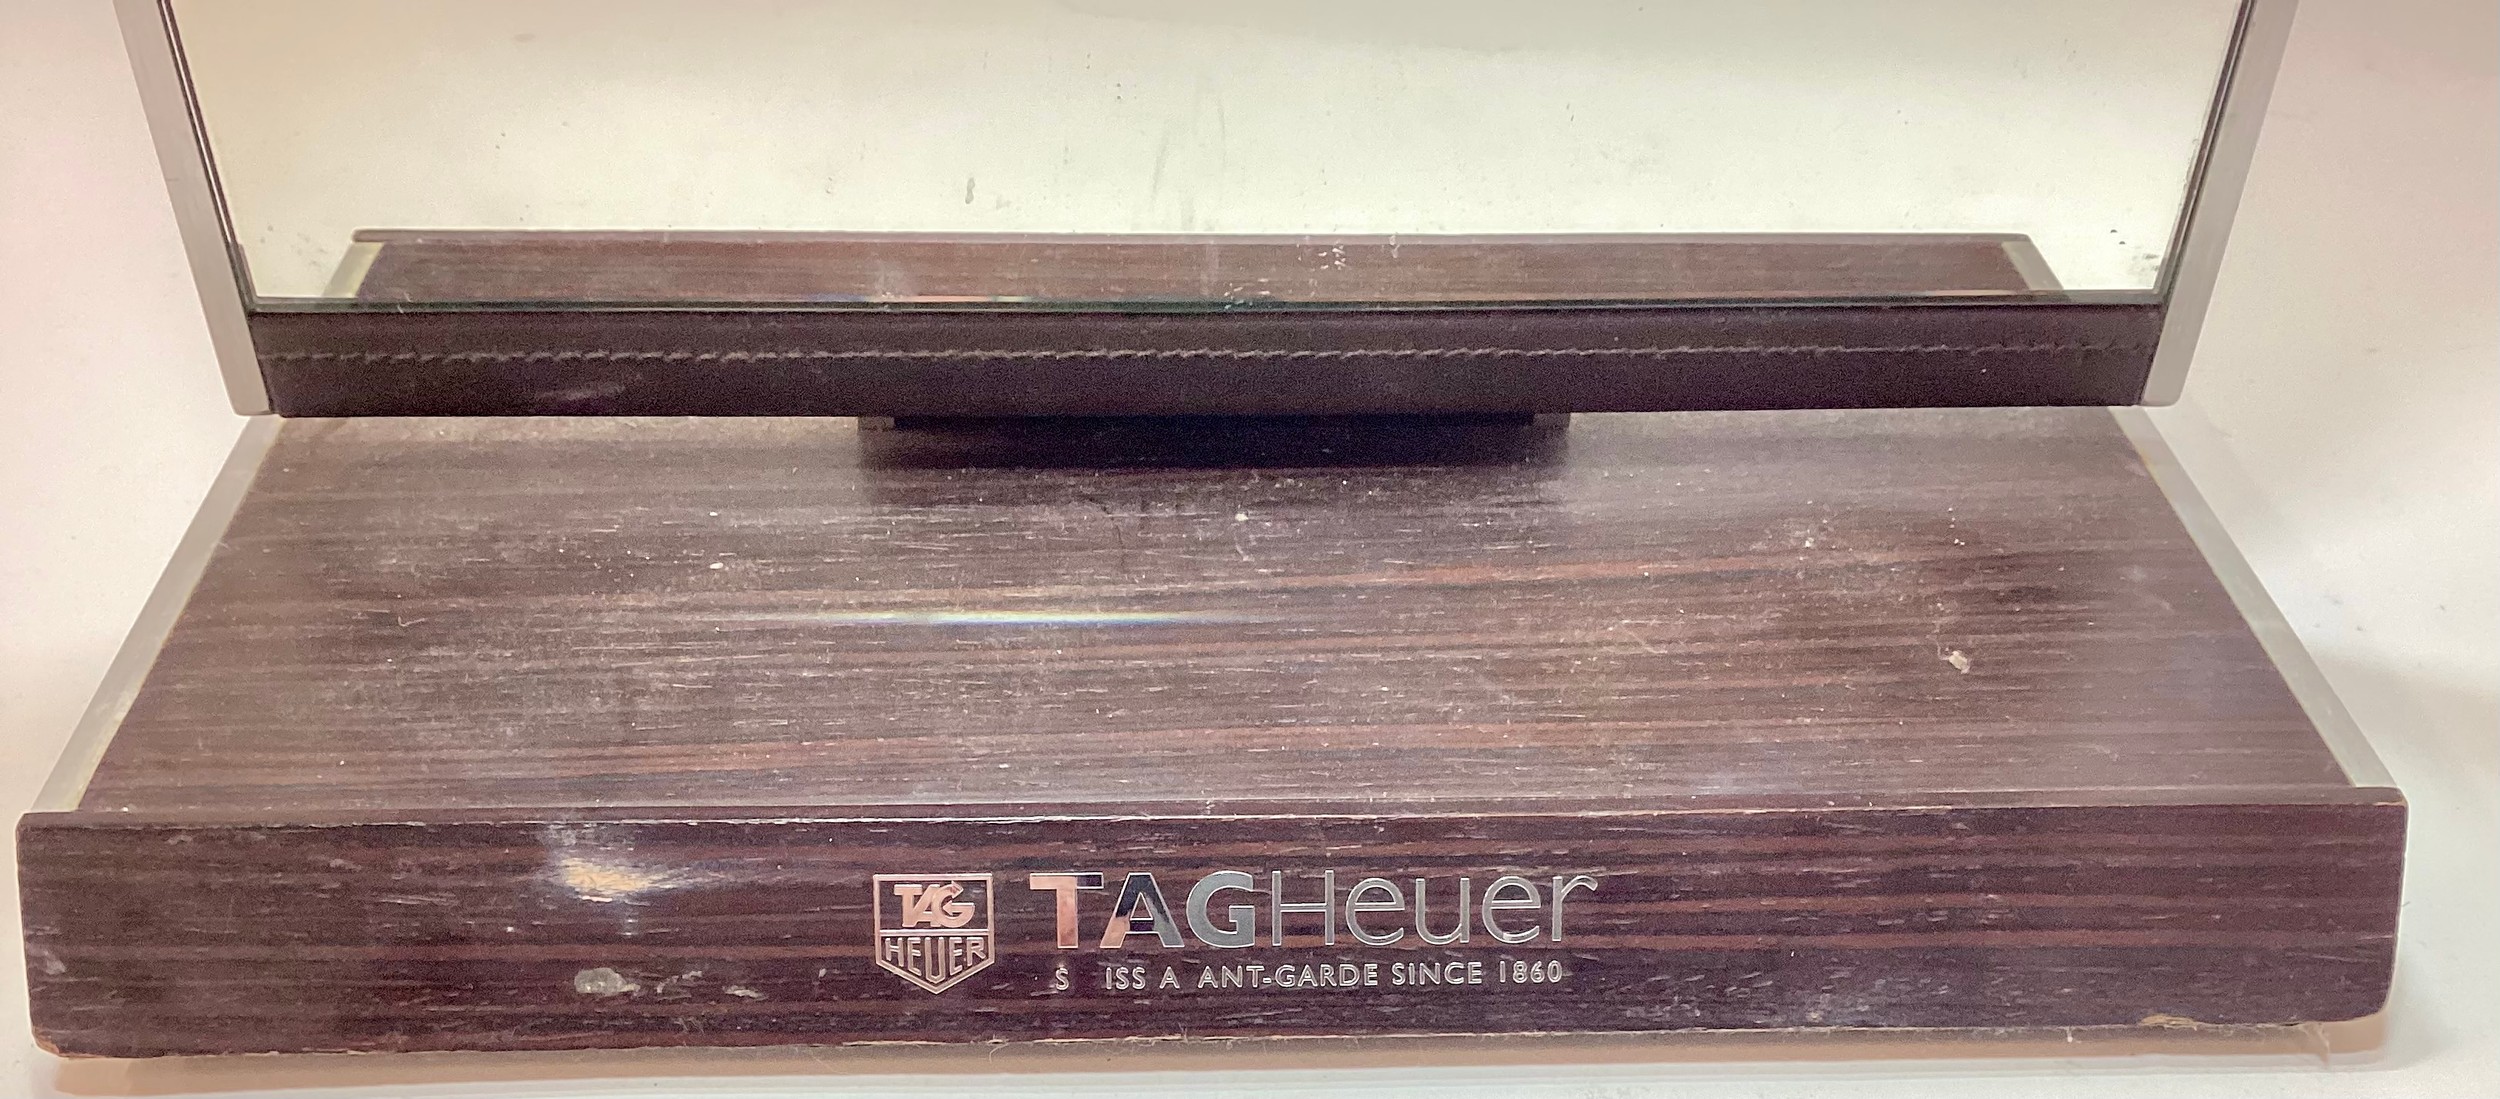 Genuine Tag Heuer dressing table mirror on revolving base 37x26x16cm - Image 3 of 6